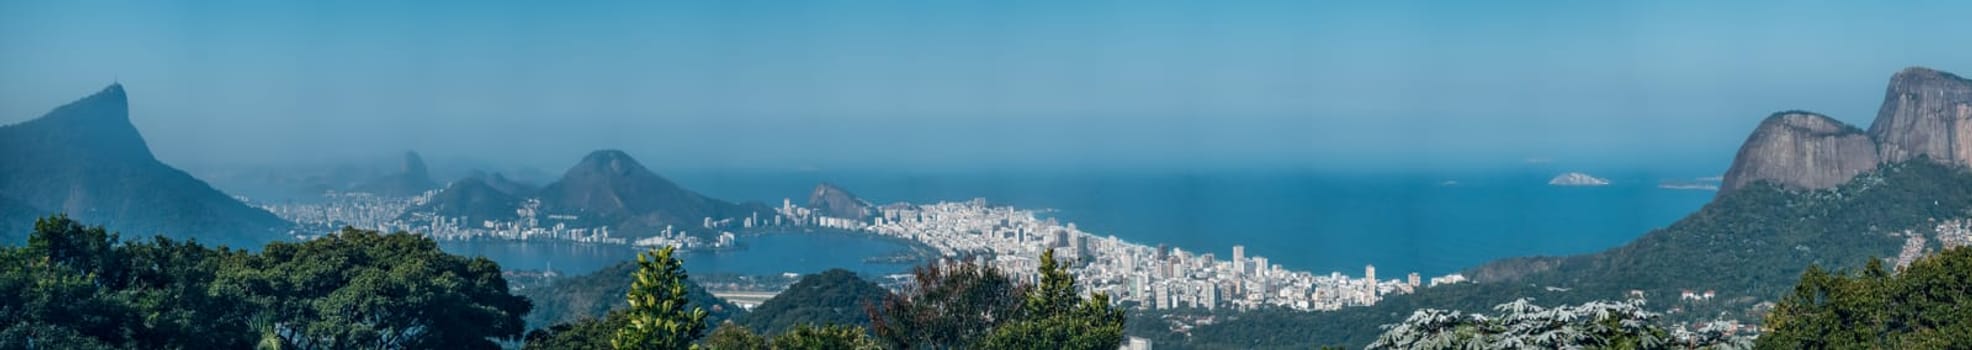 Panoramic view of Rio de Janeiro's cityscape, illustrating its iconic skyline and landmarks.